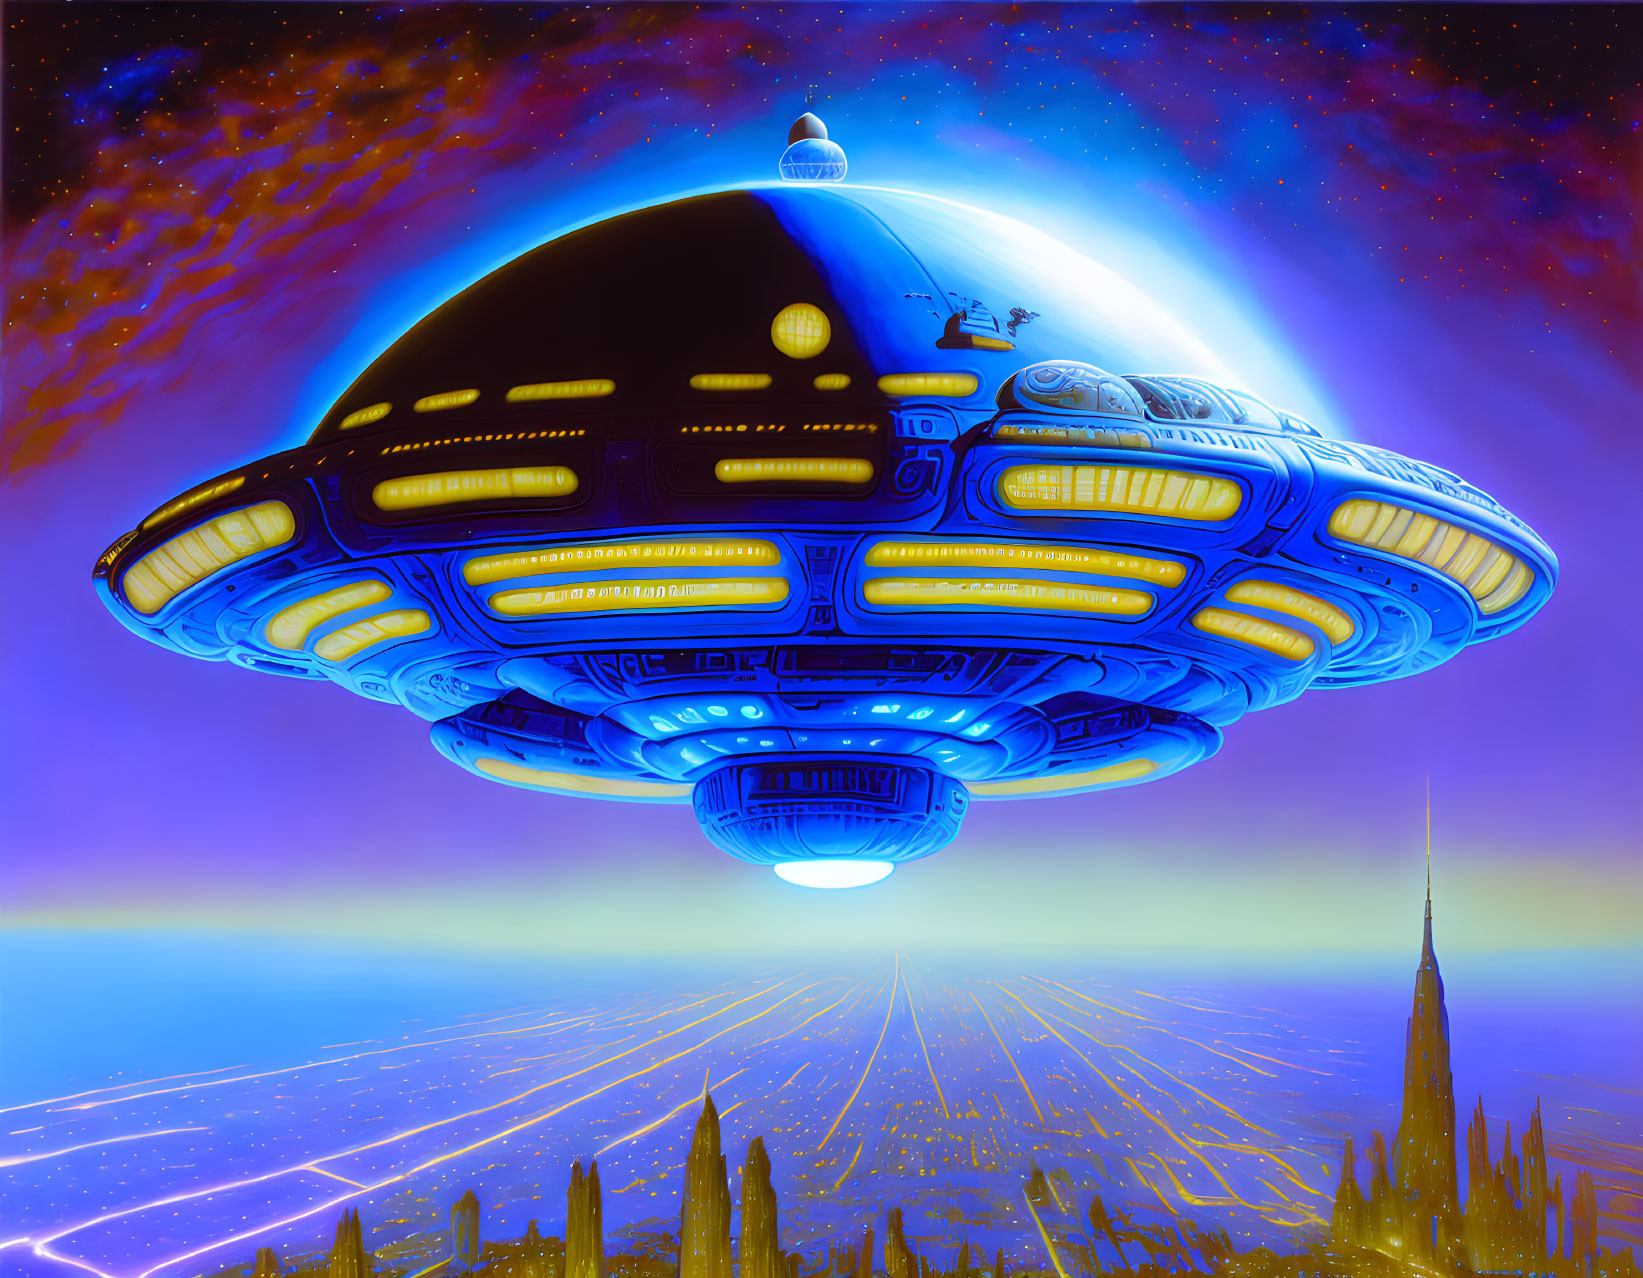 Flying saucer hovering over a city